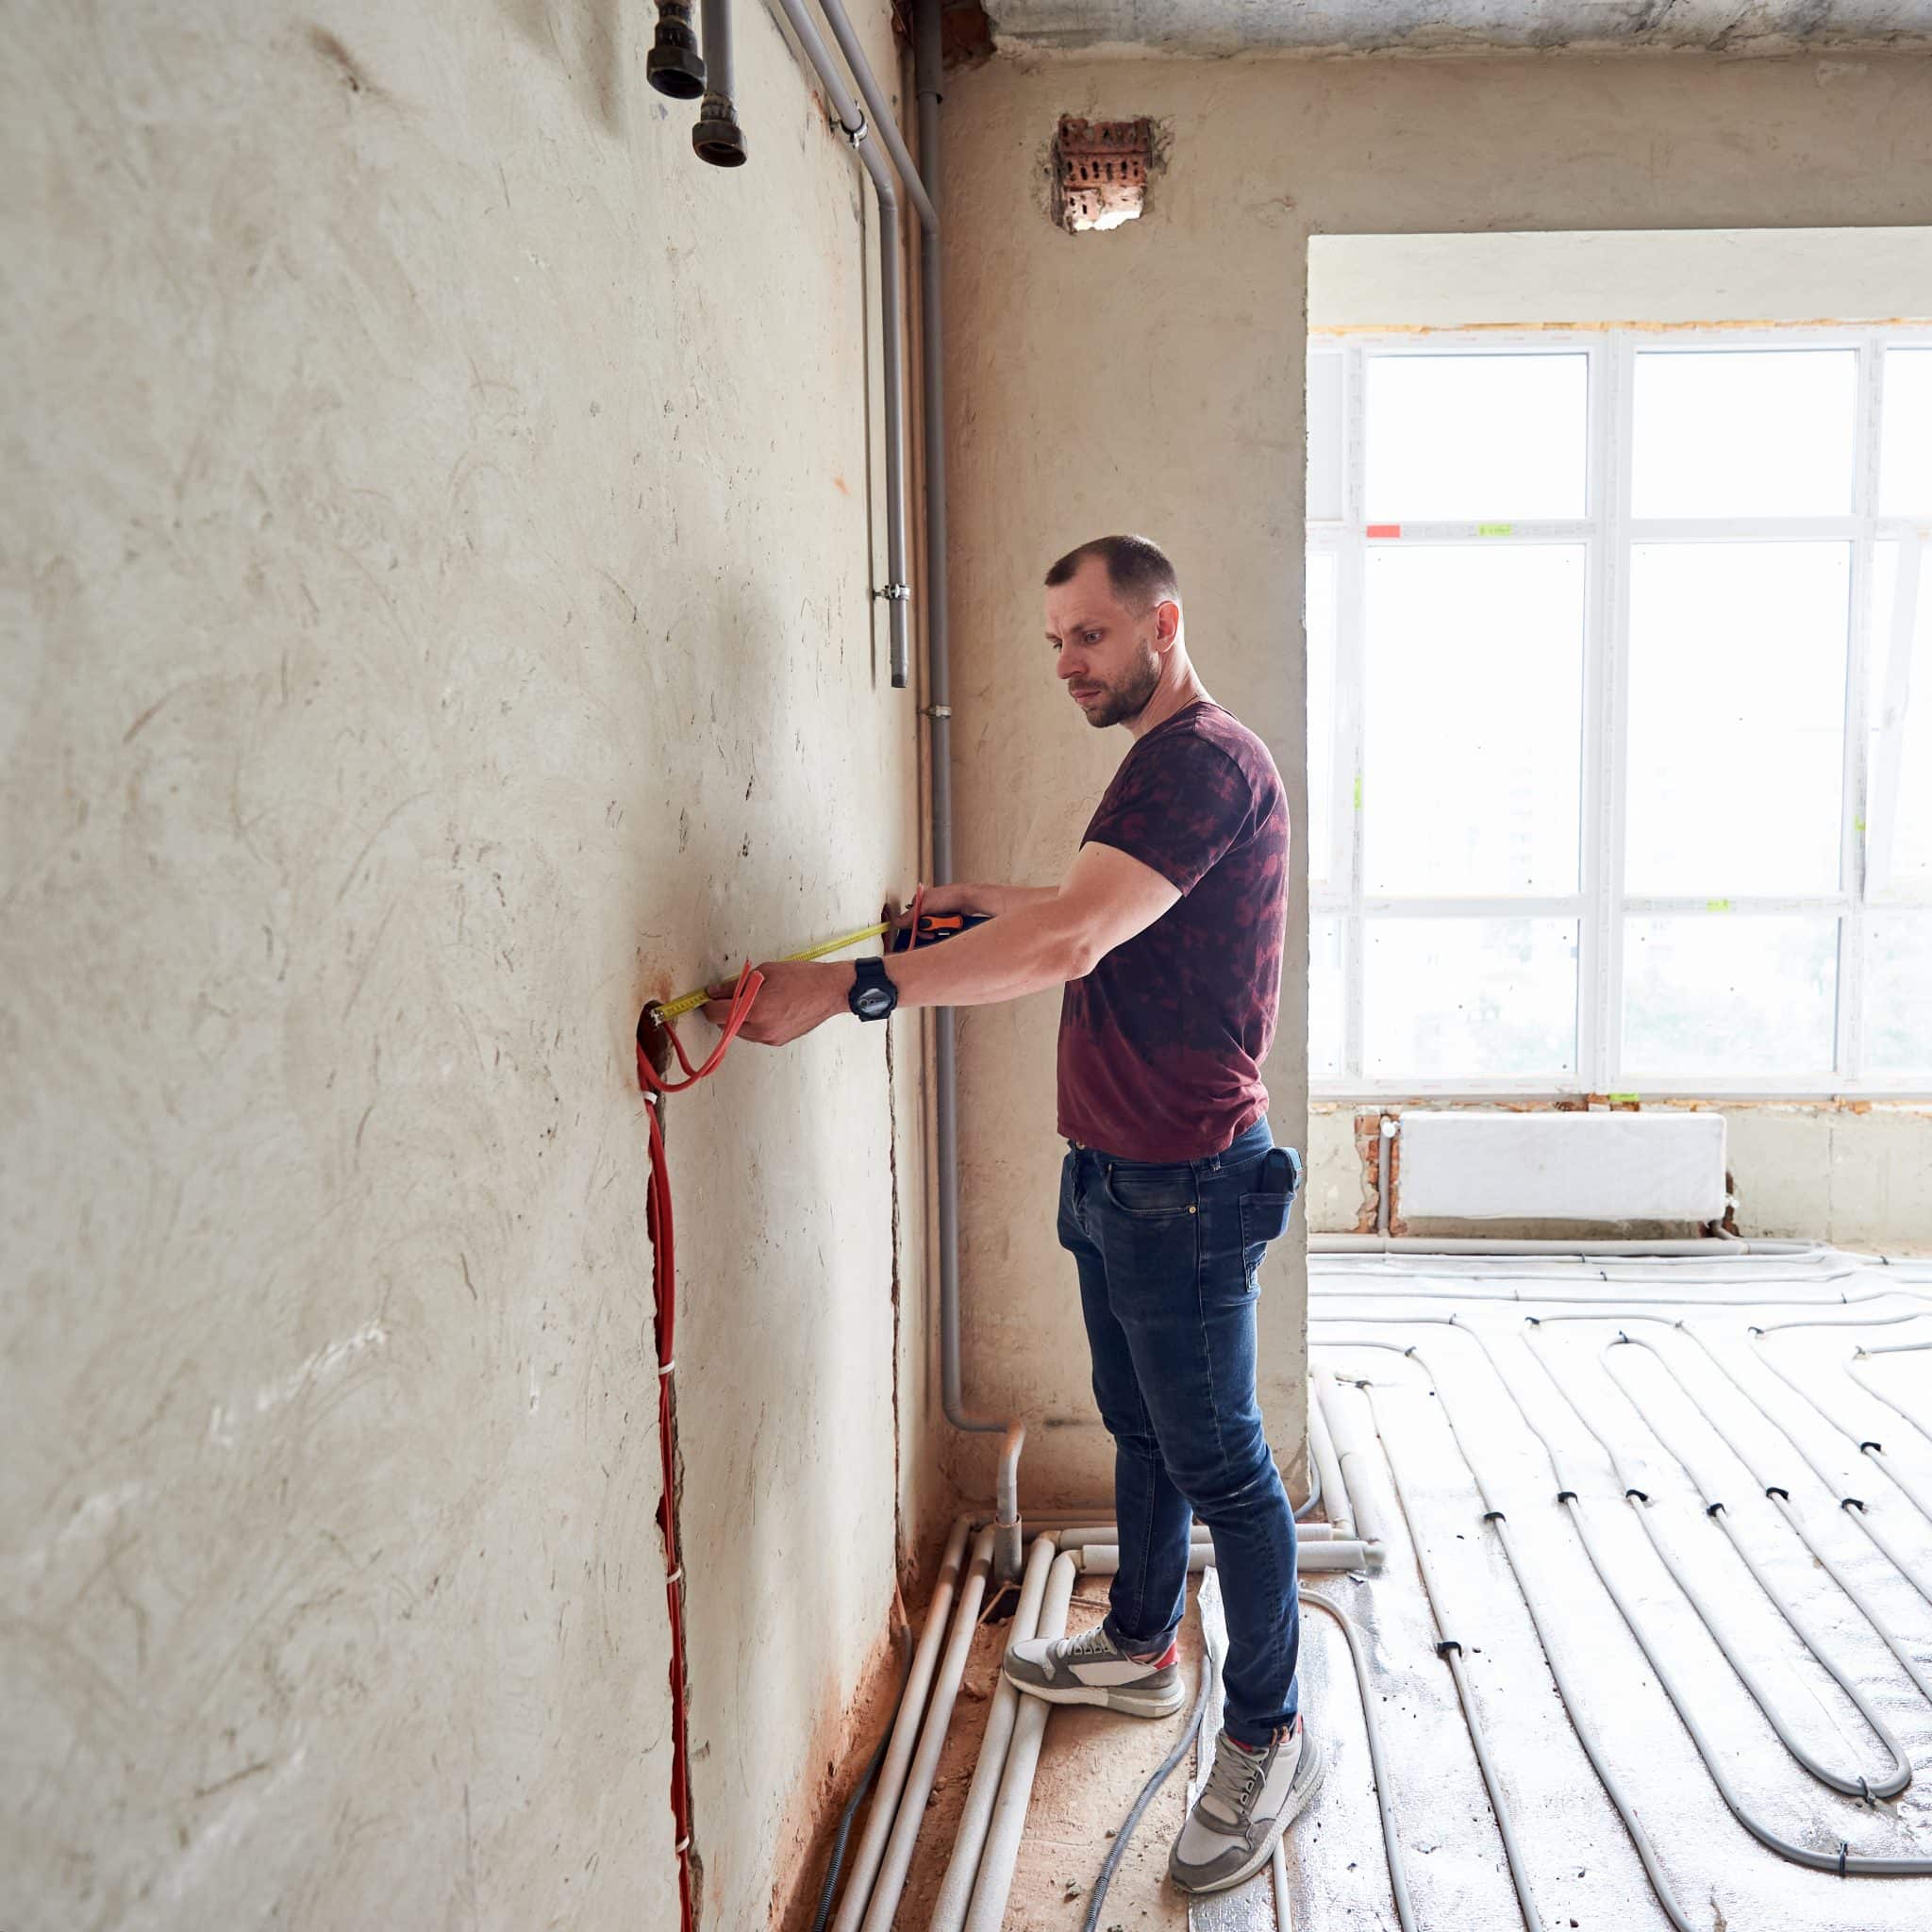 Young man in empty unfinished apartment measuring the wall with a help of measure tape, standing on floor heating pipe system against panoramic window. Concept of refurbishment and renovation.